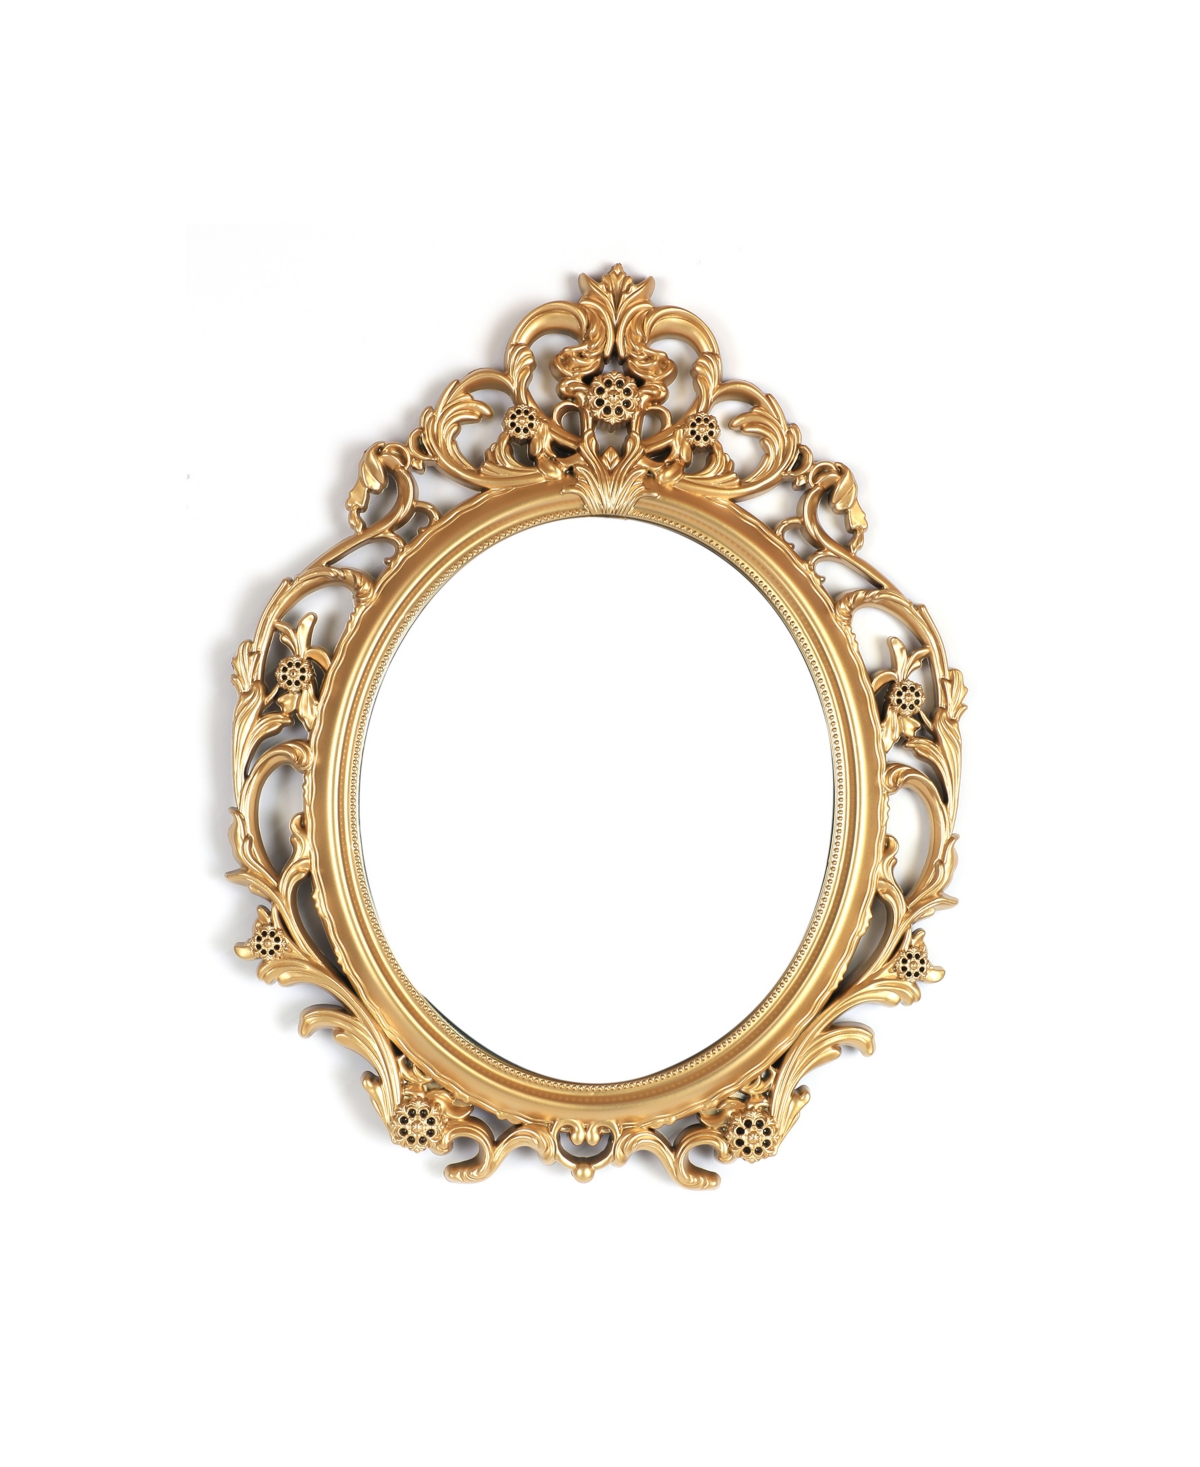 Oval Antique-Like Framed Mirror, 24" x 20" - Gold